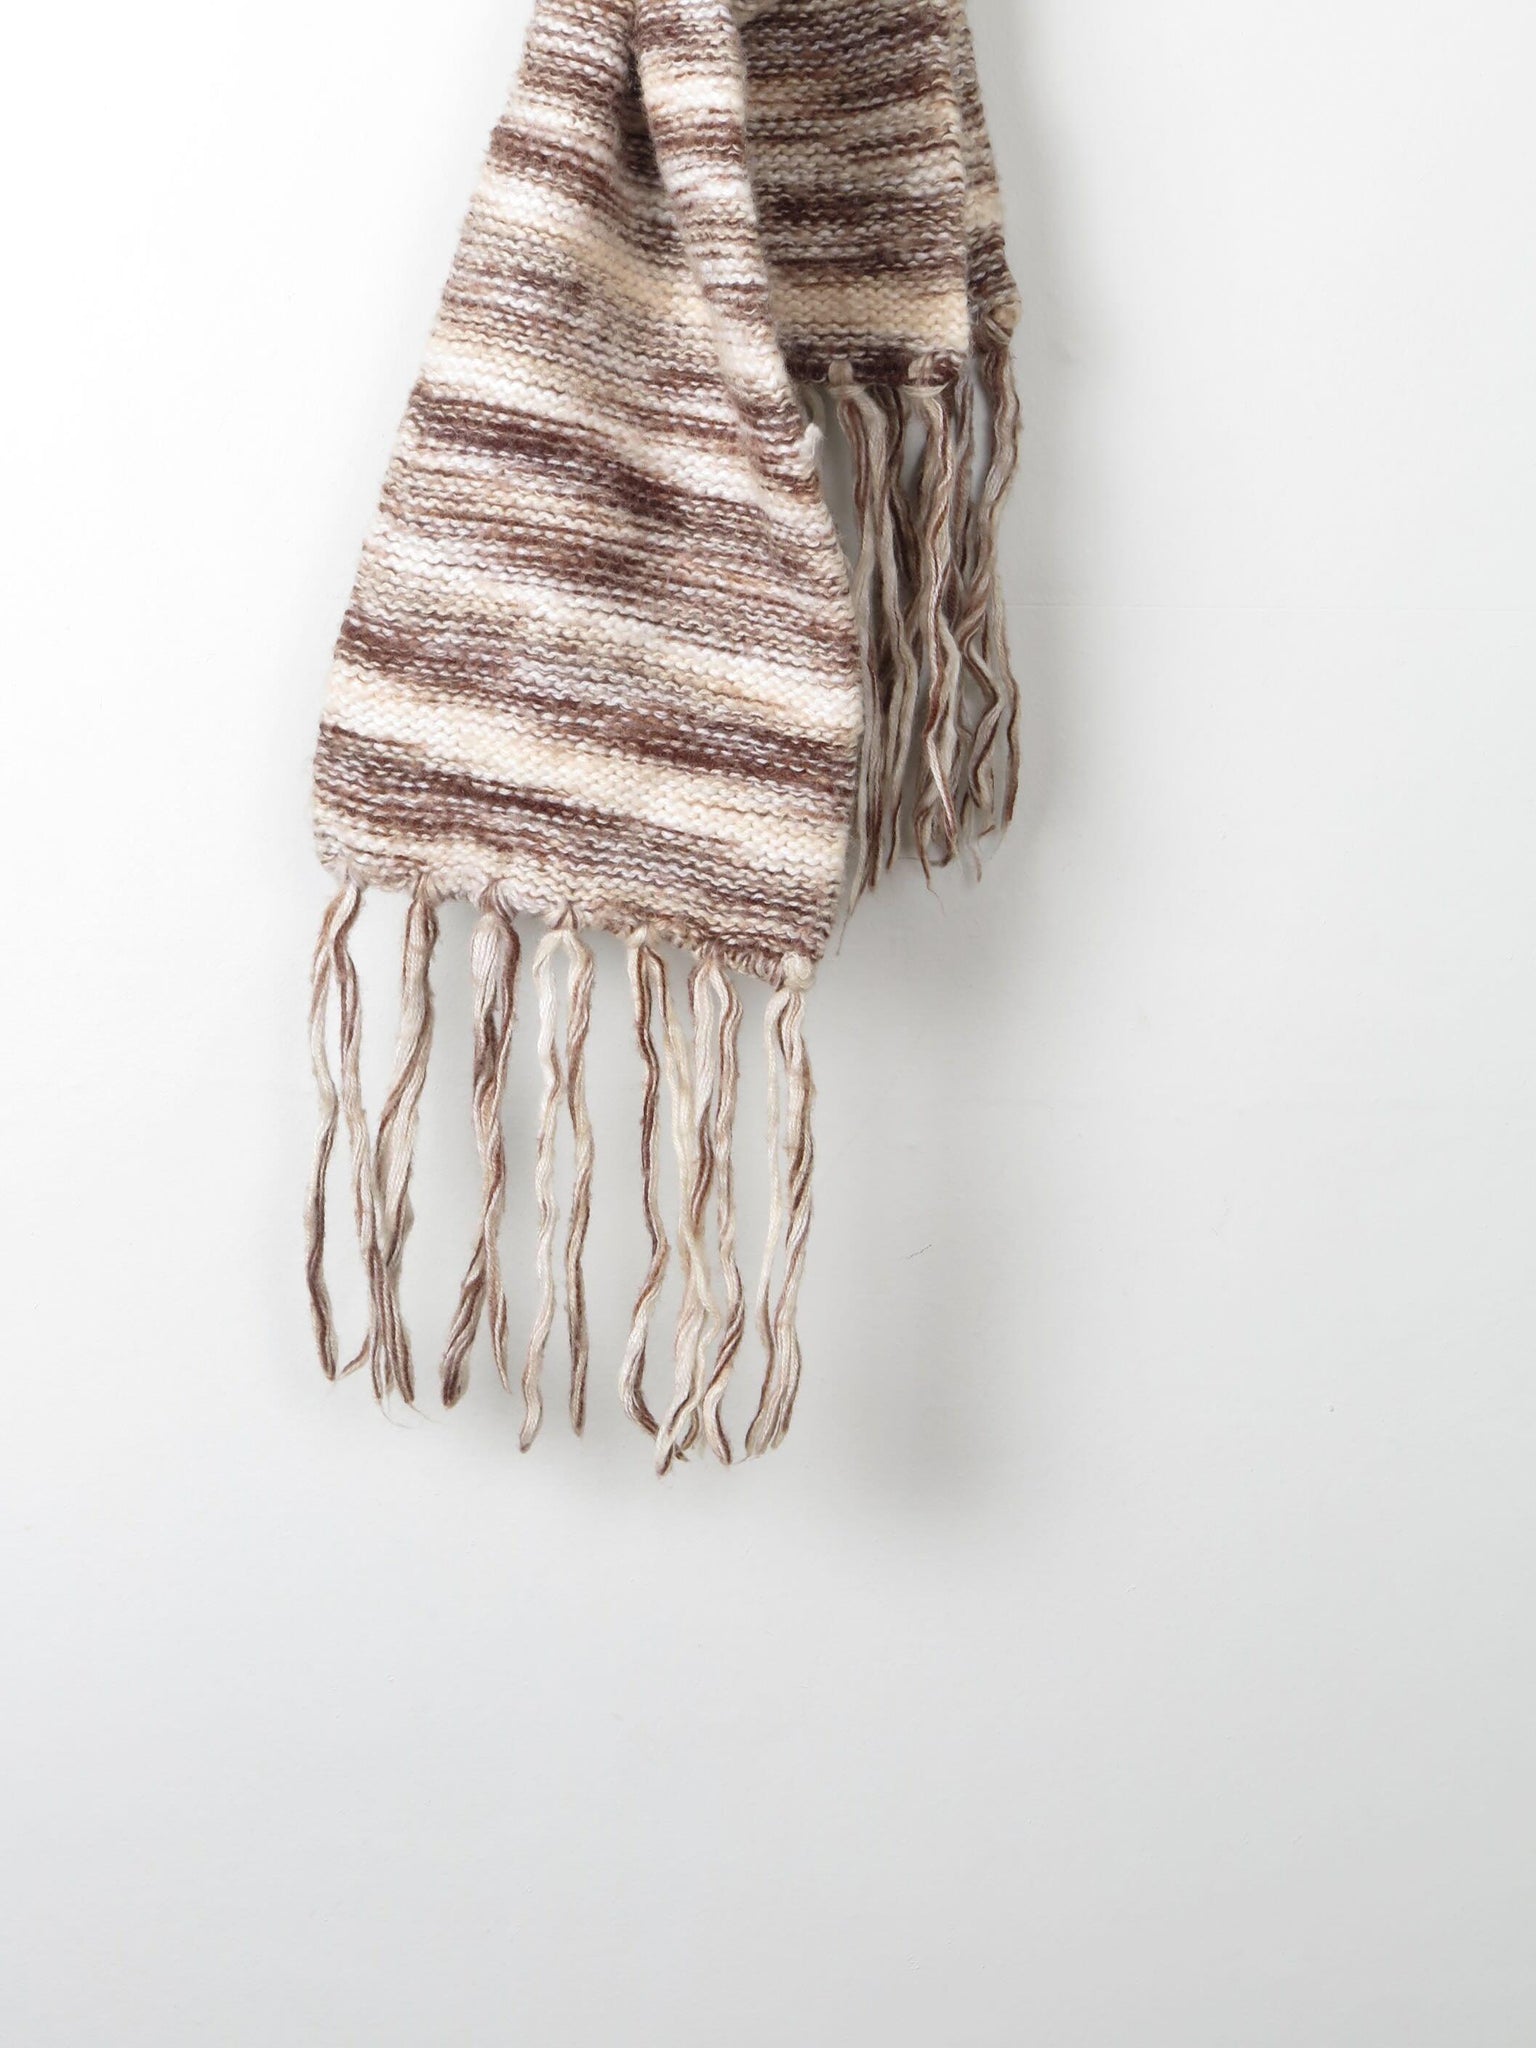 Vintage Wool Striped Knitted Scarf - The Harlequin